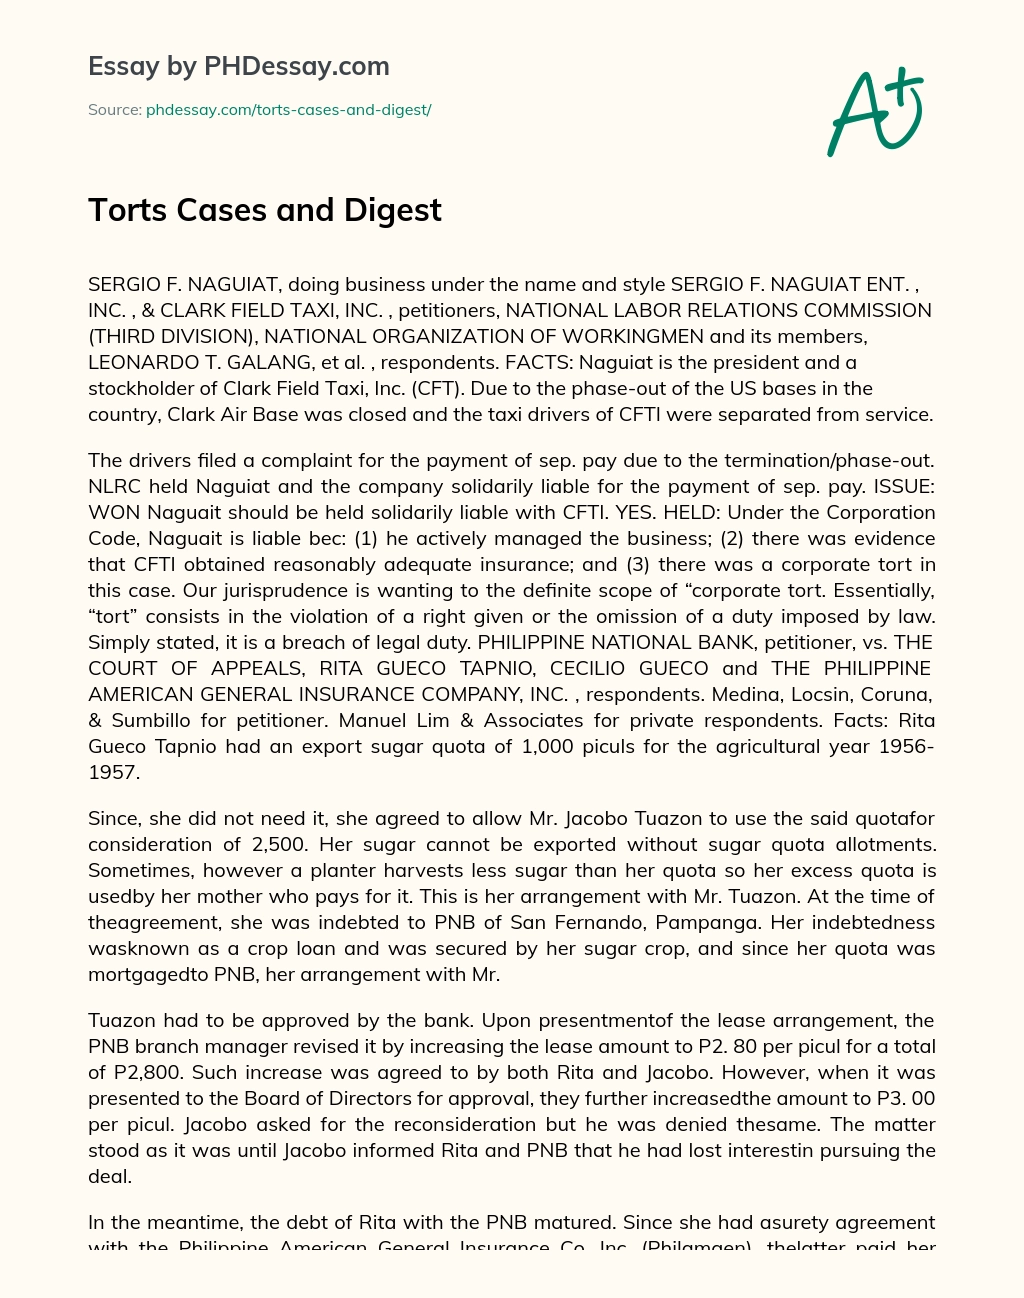 Torts Cases and Digest essay